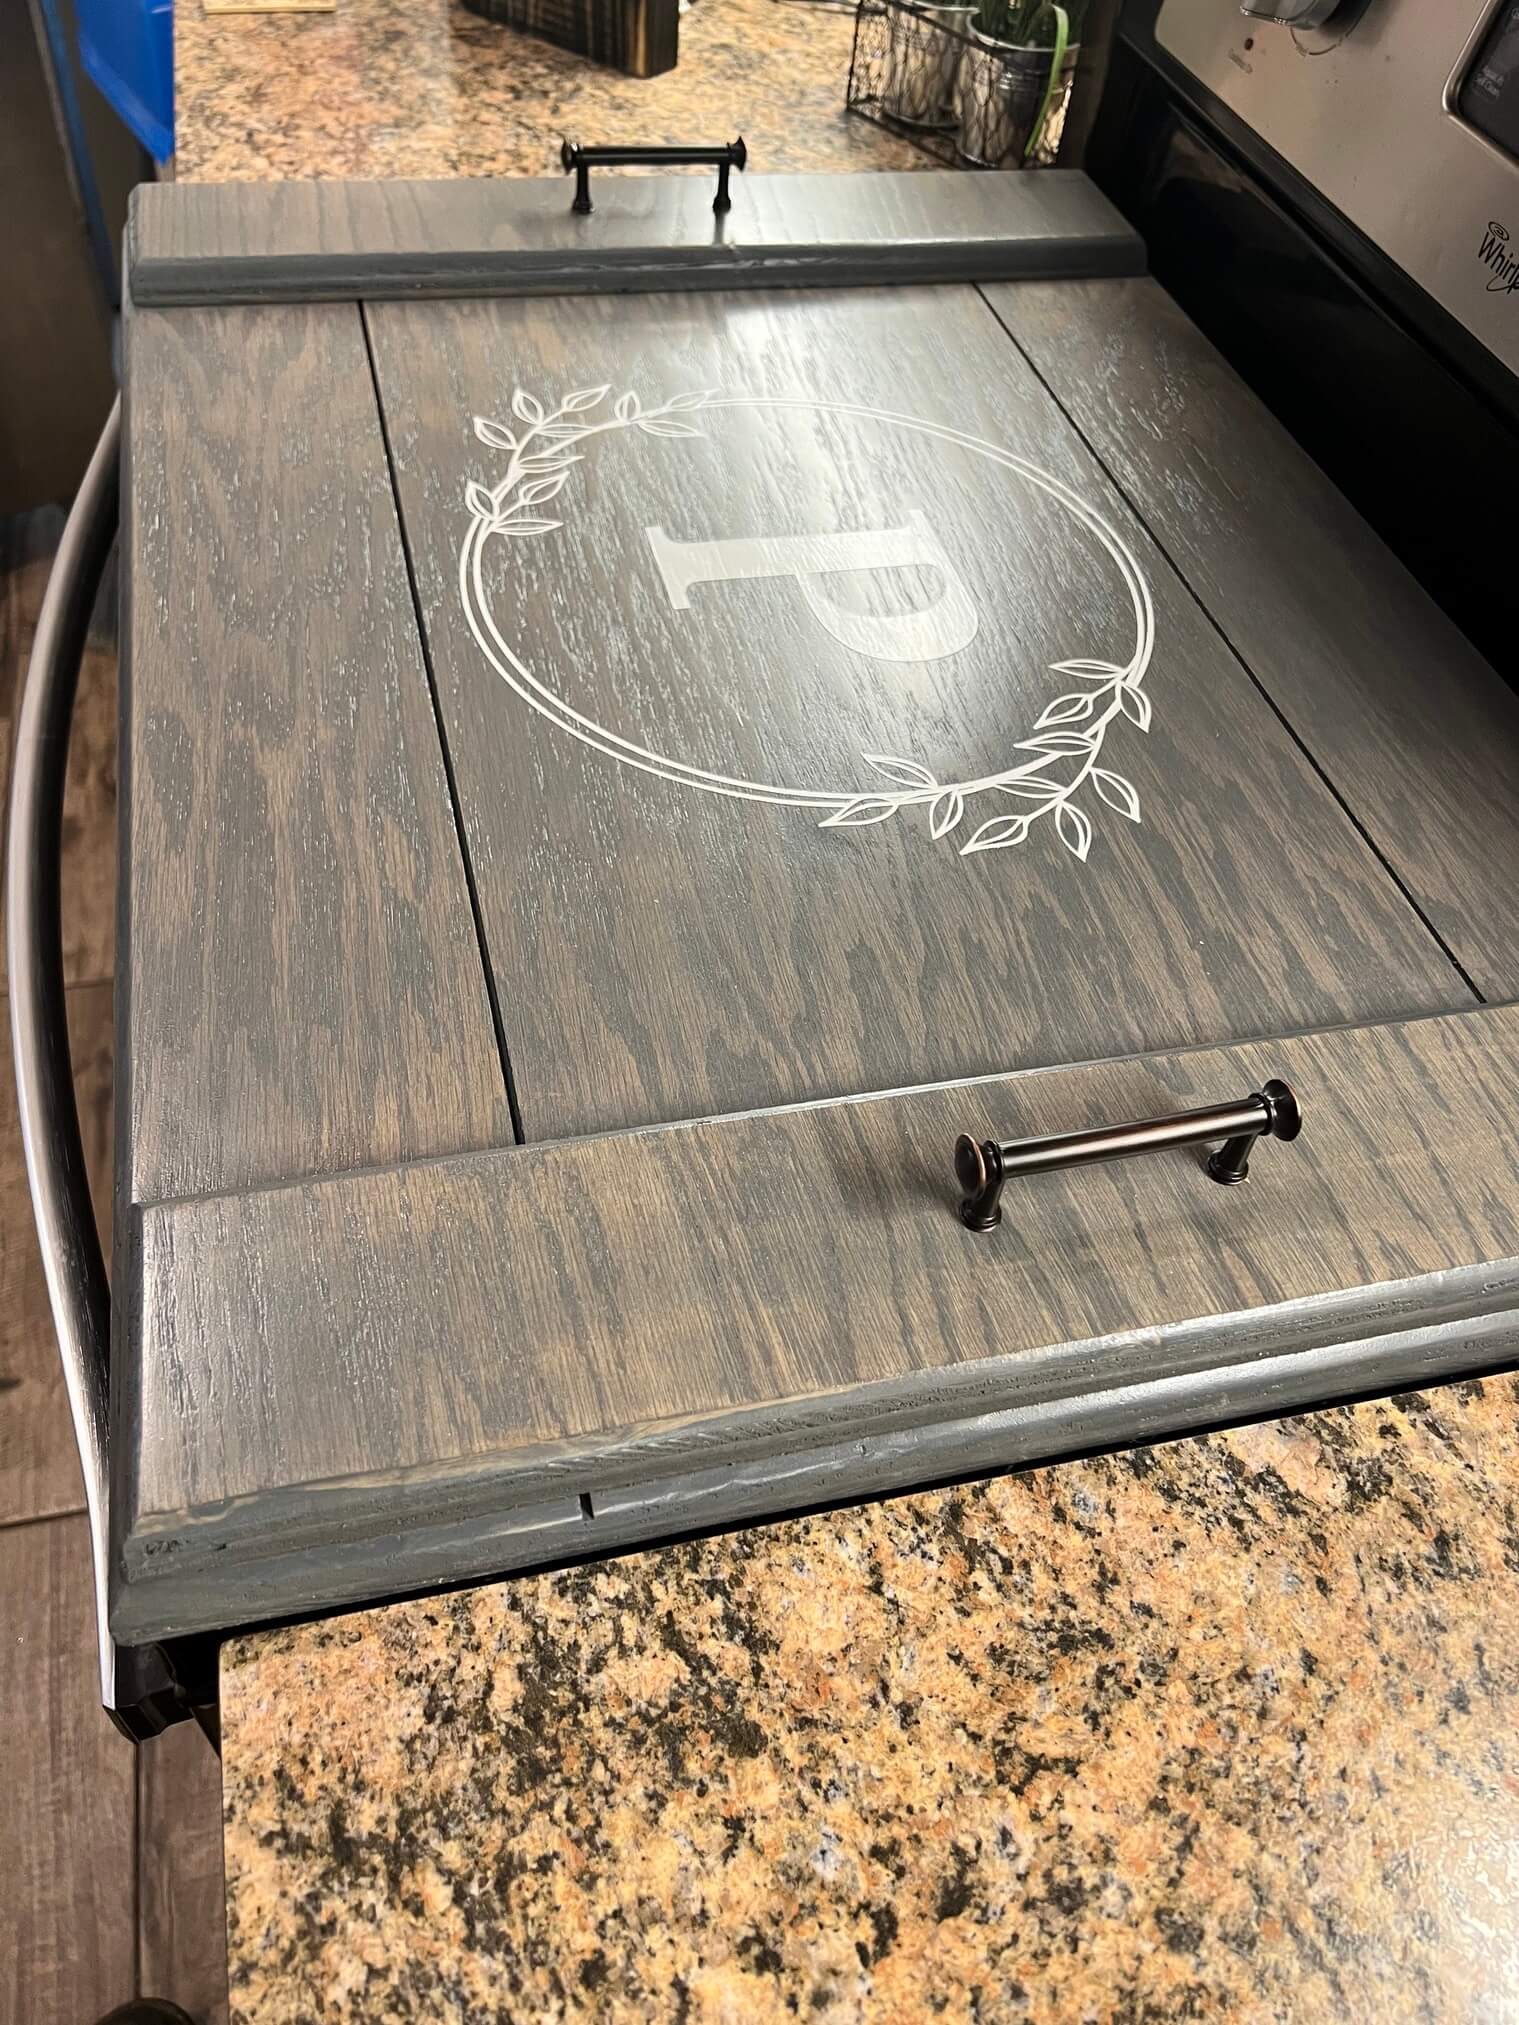 Noodle Board for glass top stove tops